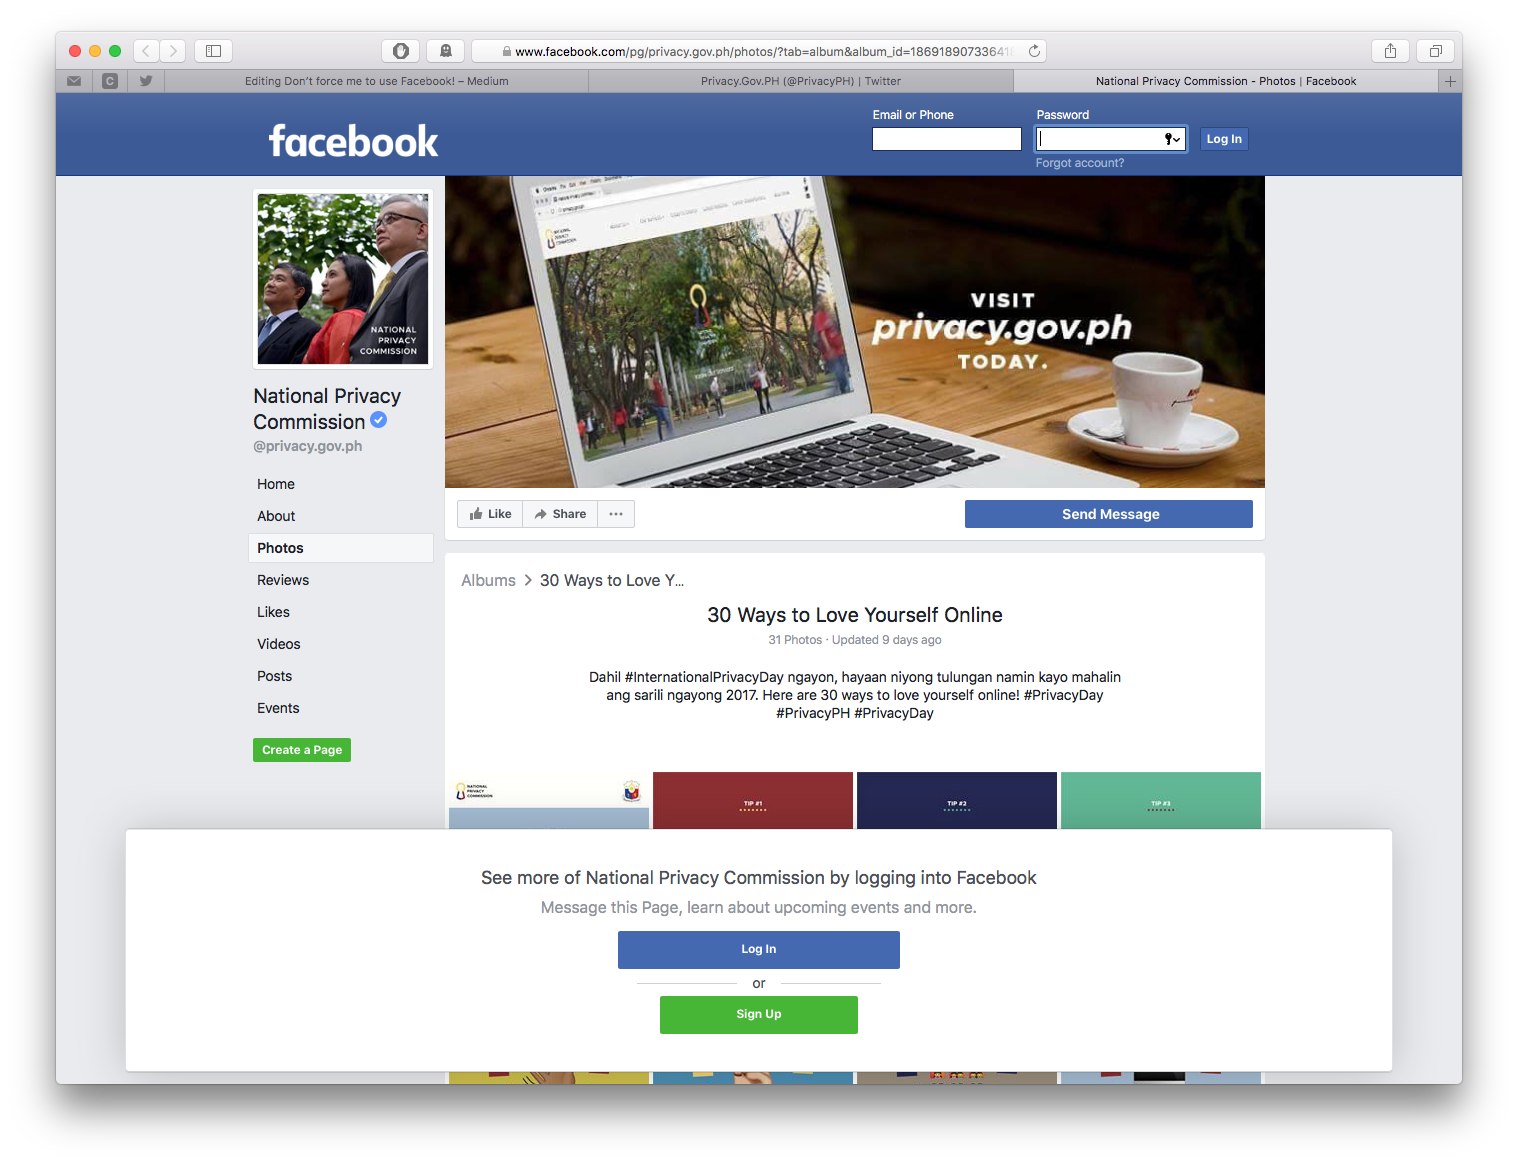 Facebook sharing information with third parties